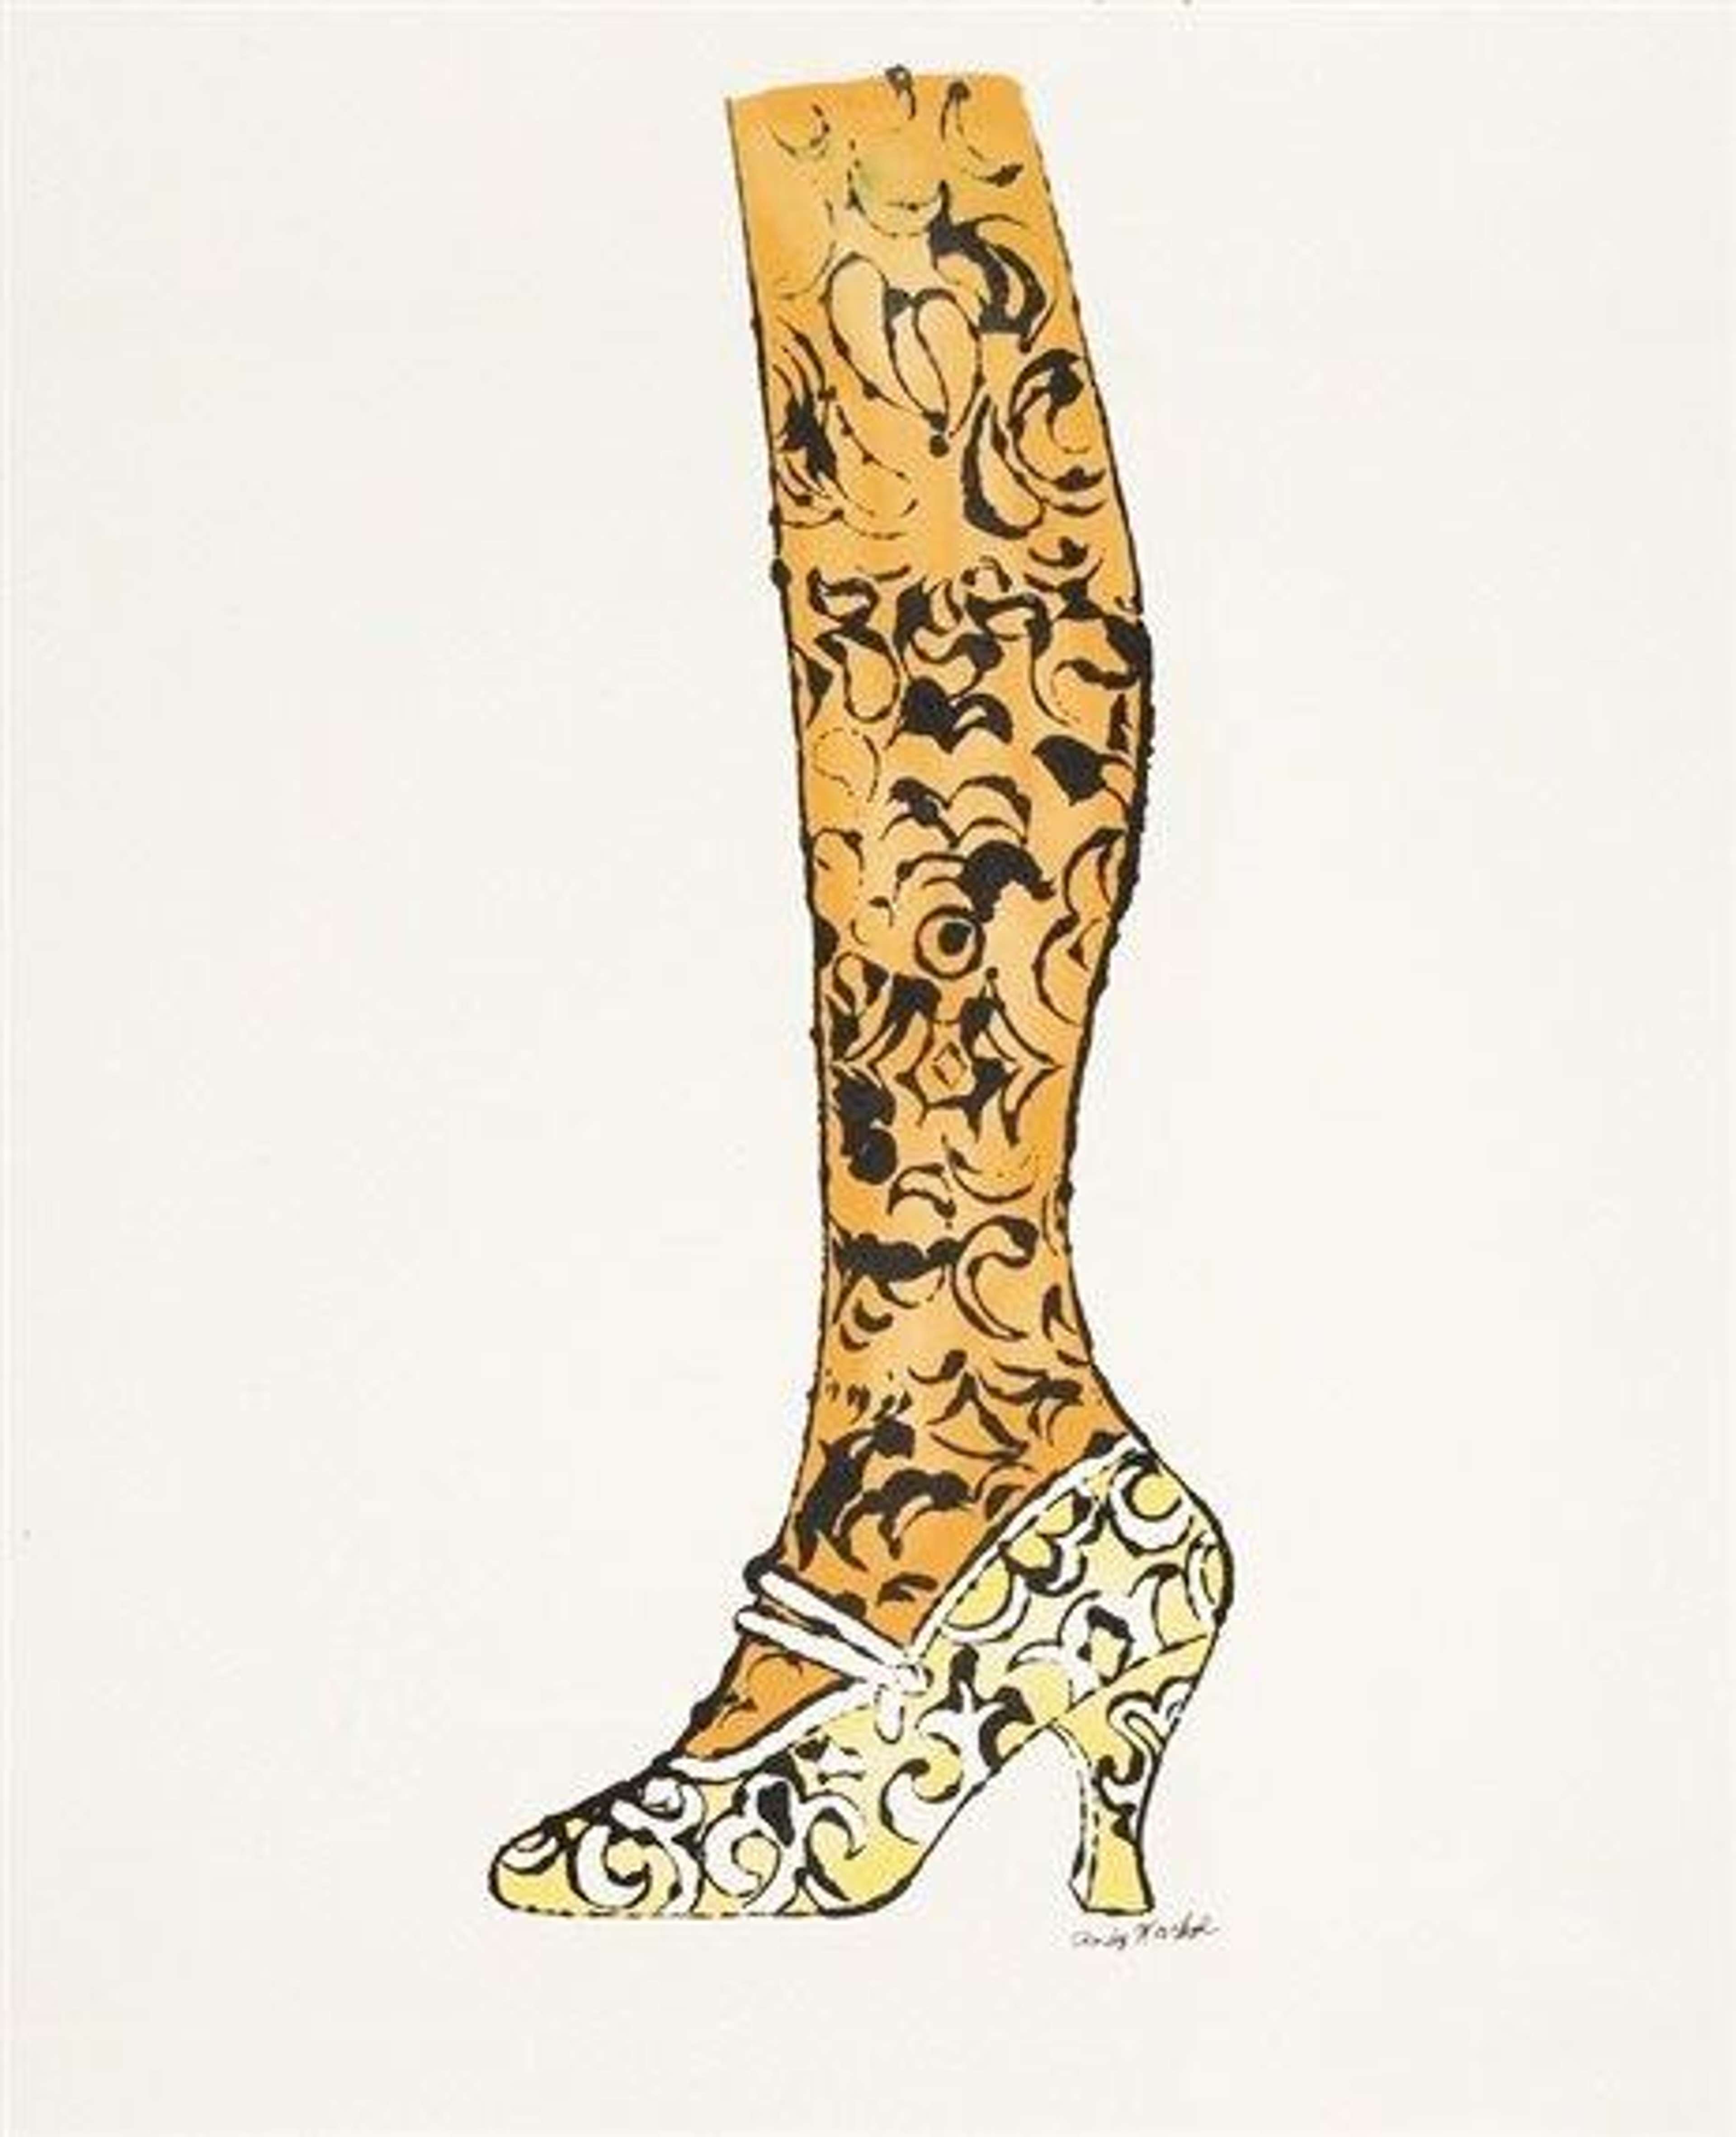 This larger image from Andy Warhol’s series La Recherche du Shoe Perdu, depicts a golden leg and foot clad in a yellow high-heeled shoe.